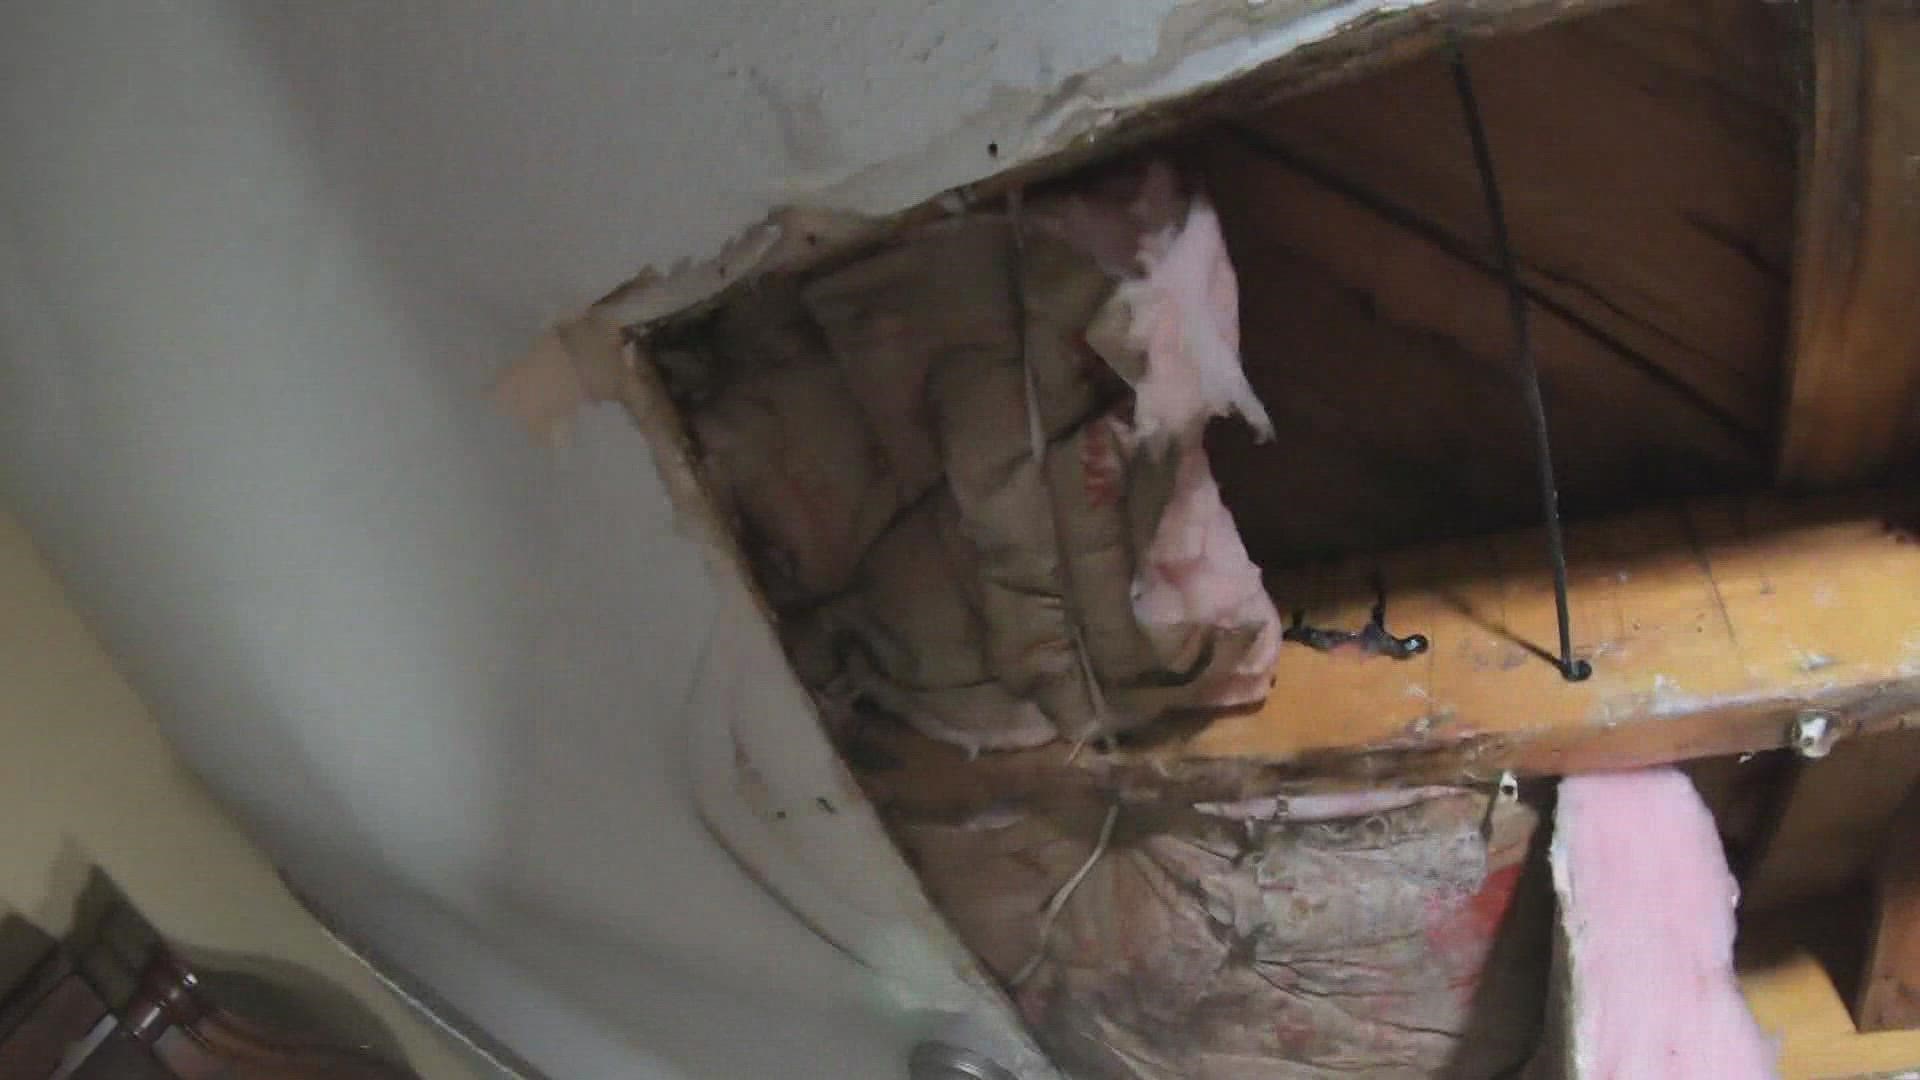 Eyewitness News spoke with tenants who say their apartments contain mold and ceilings are leaking.